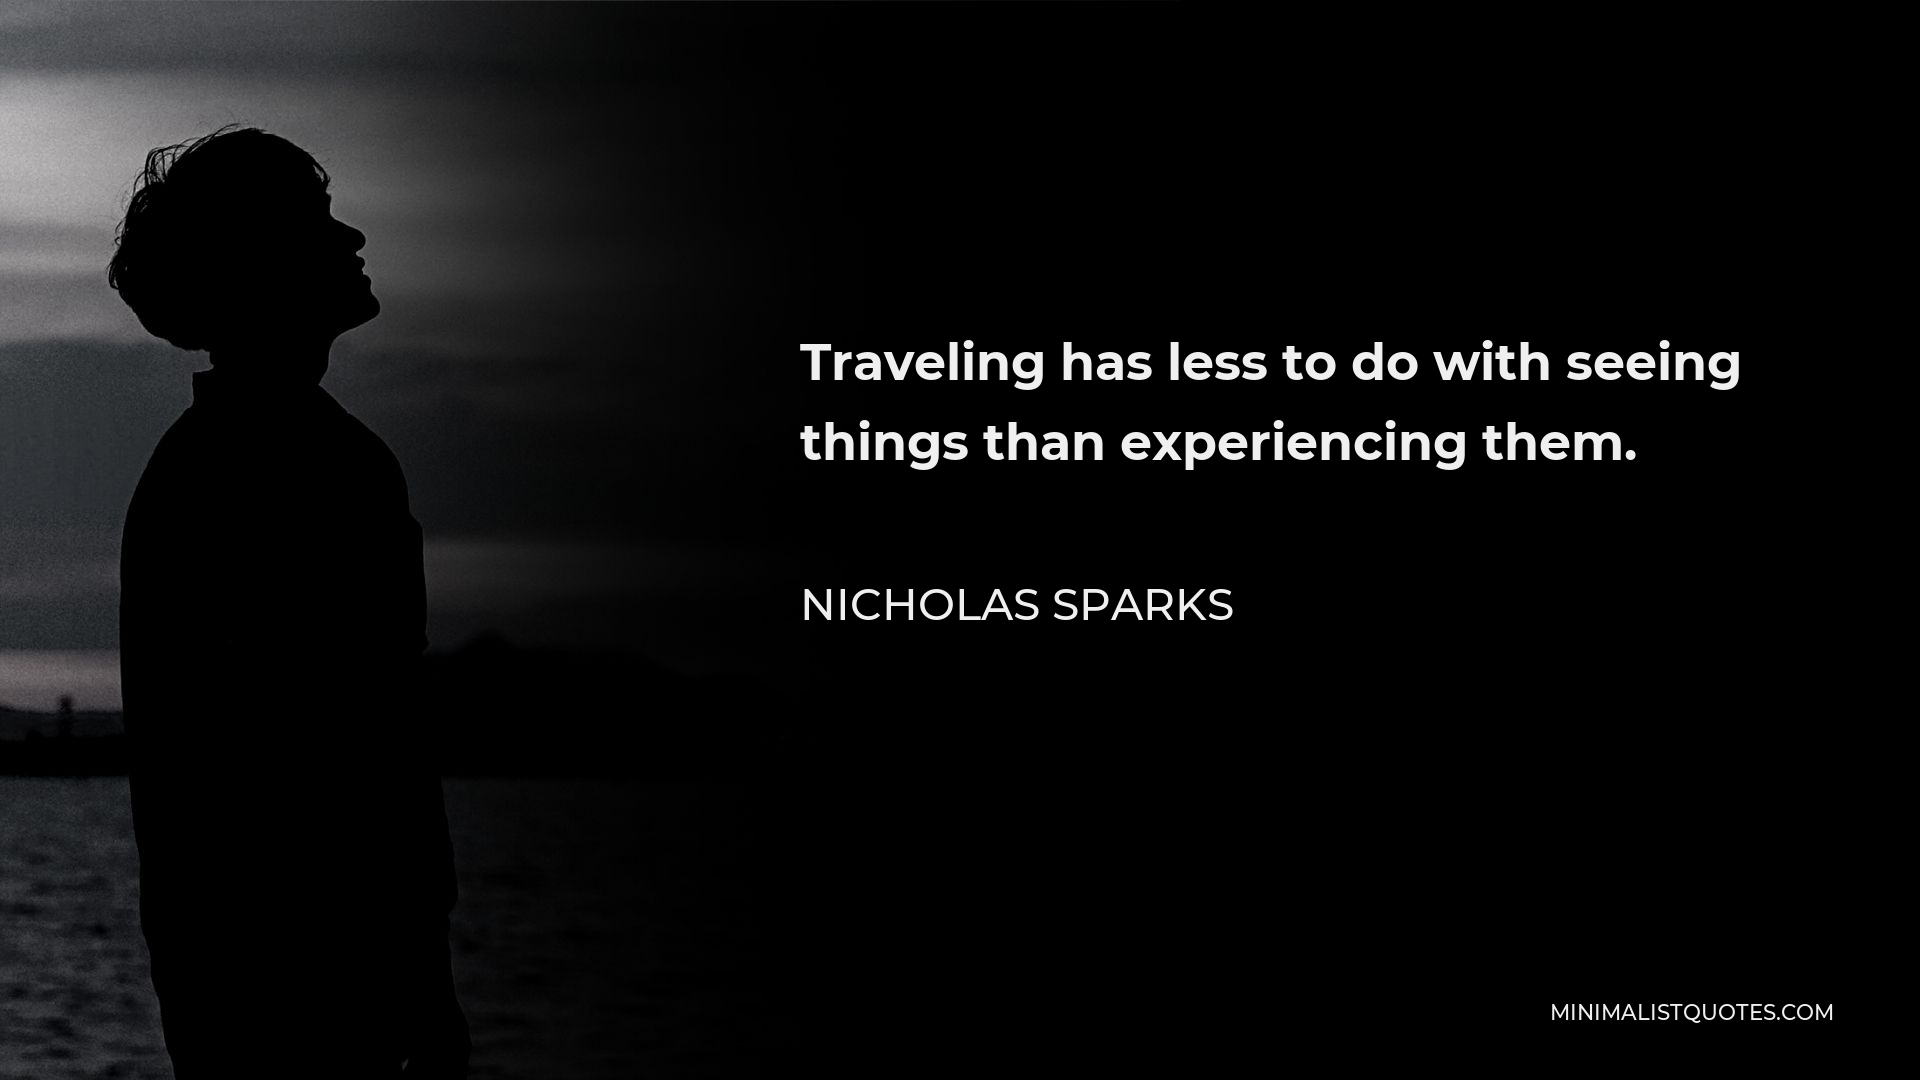 Nicholas Sparks Quote - Traveling has less to do with seeing things than experiencing them.